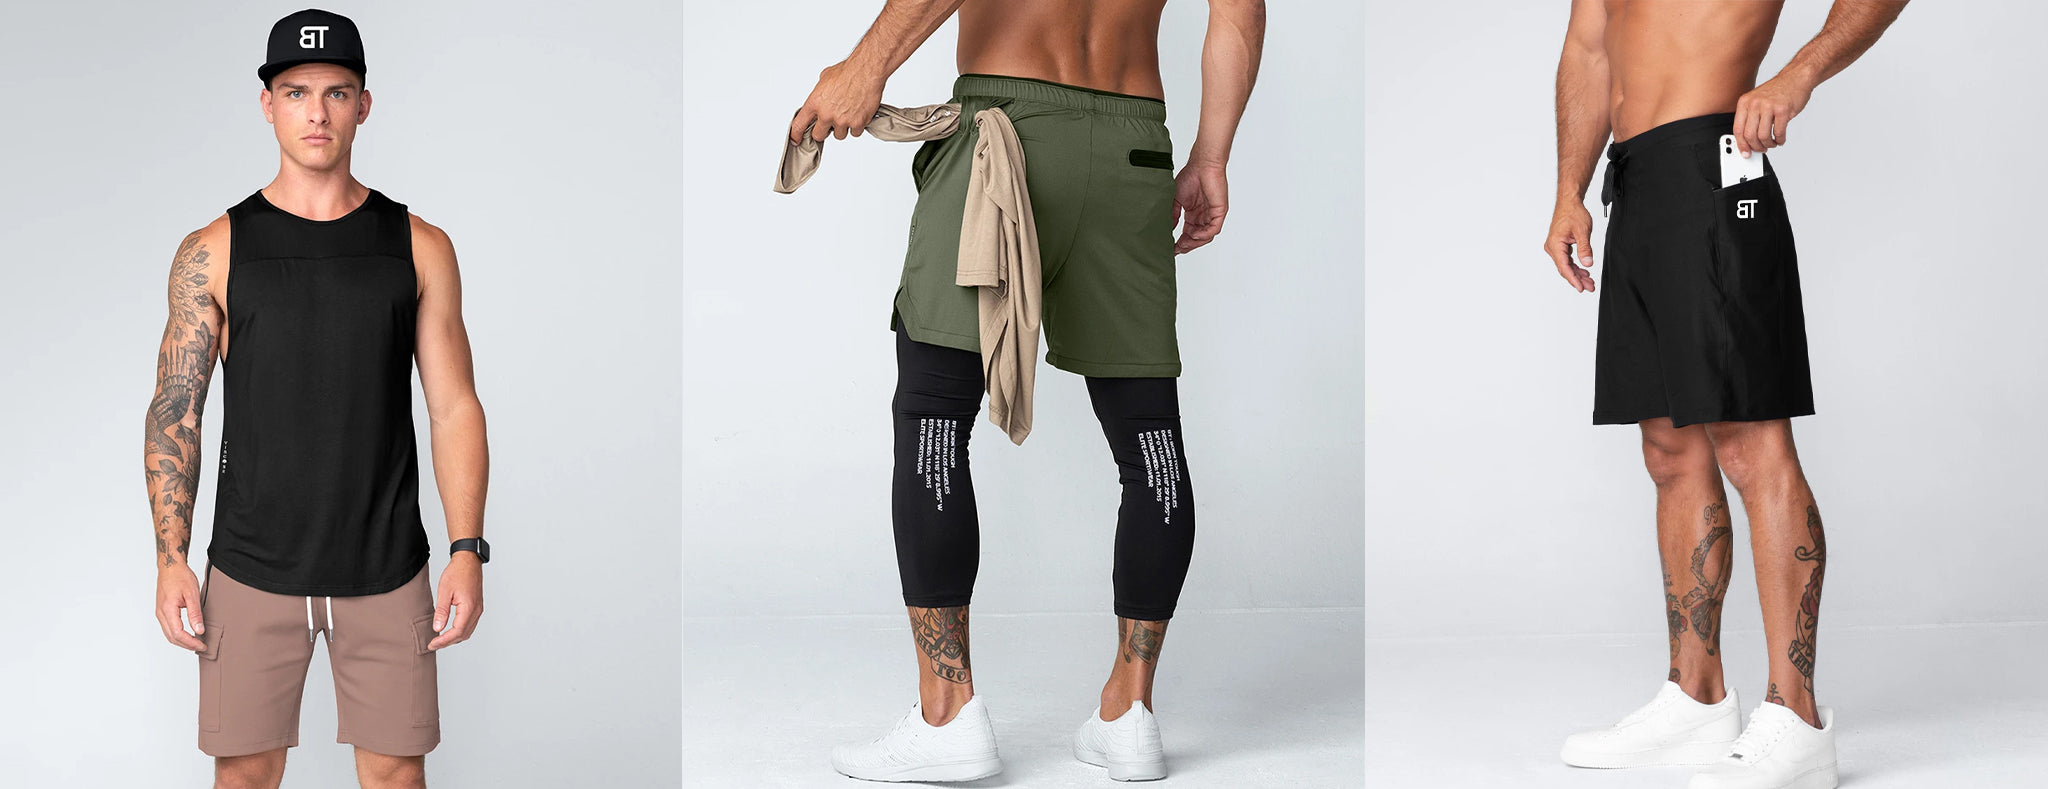 WHAT ARE THE IDIOSYNCRASIES THAT WE CONSIDERED WHILE RANKING THESE DELUXE WORKOUT SHORTS